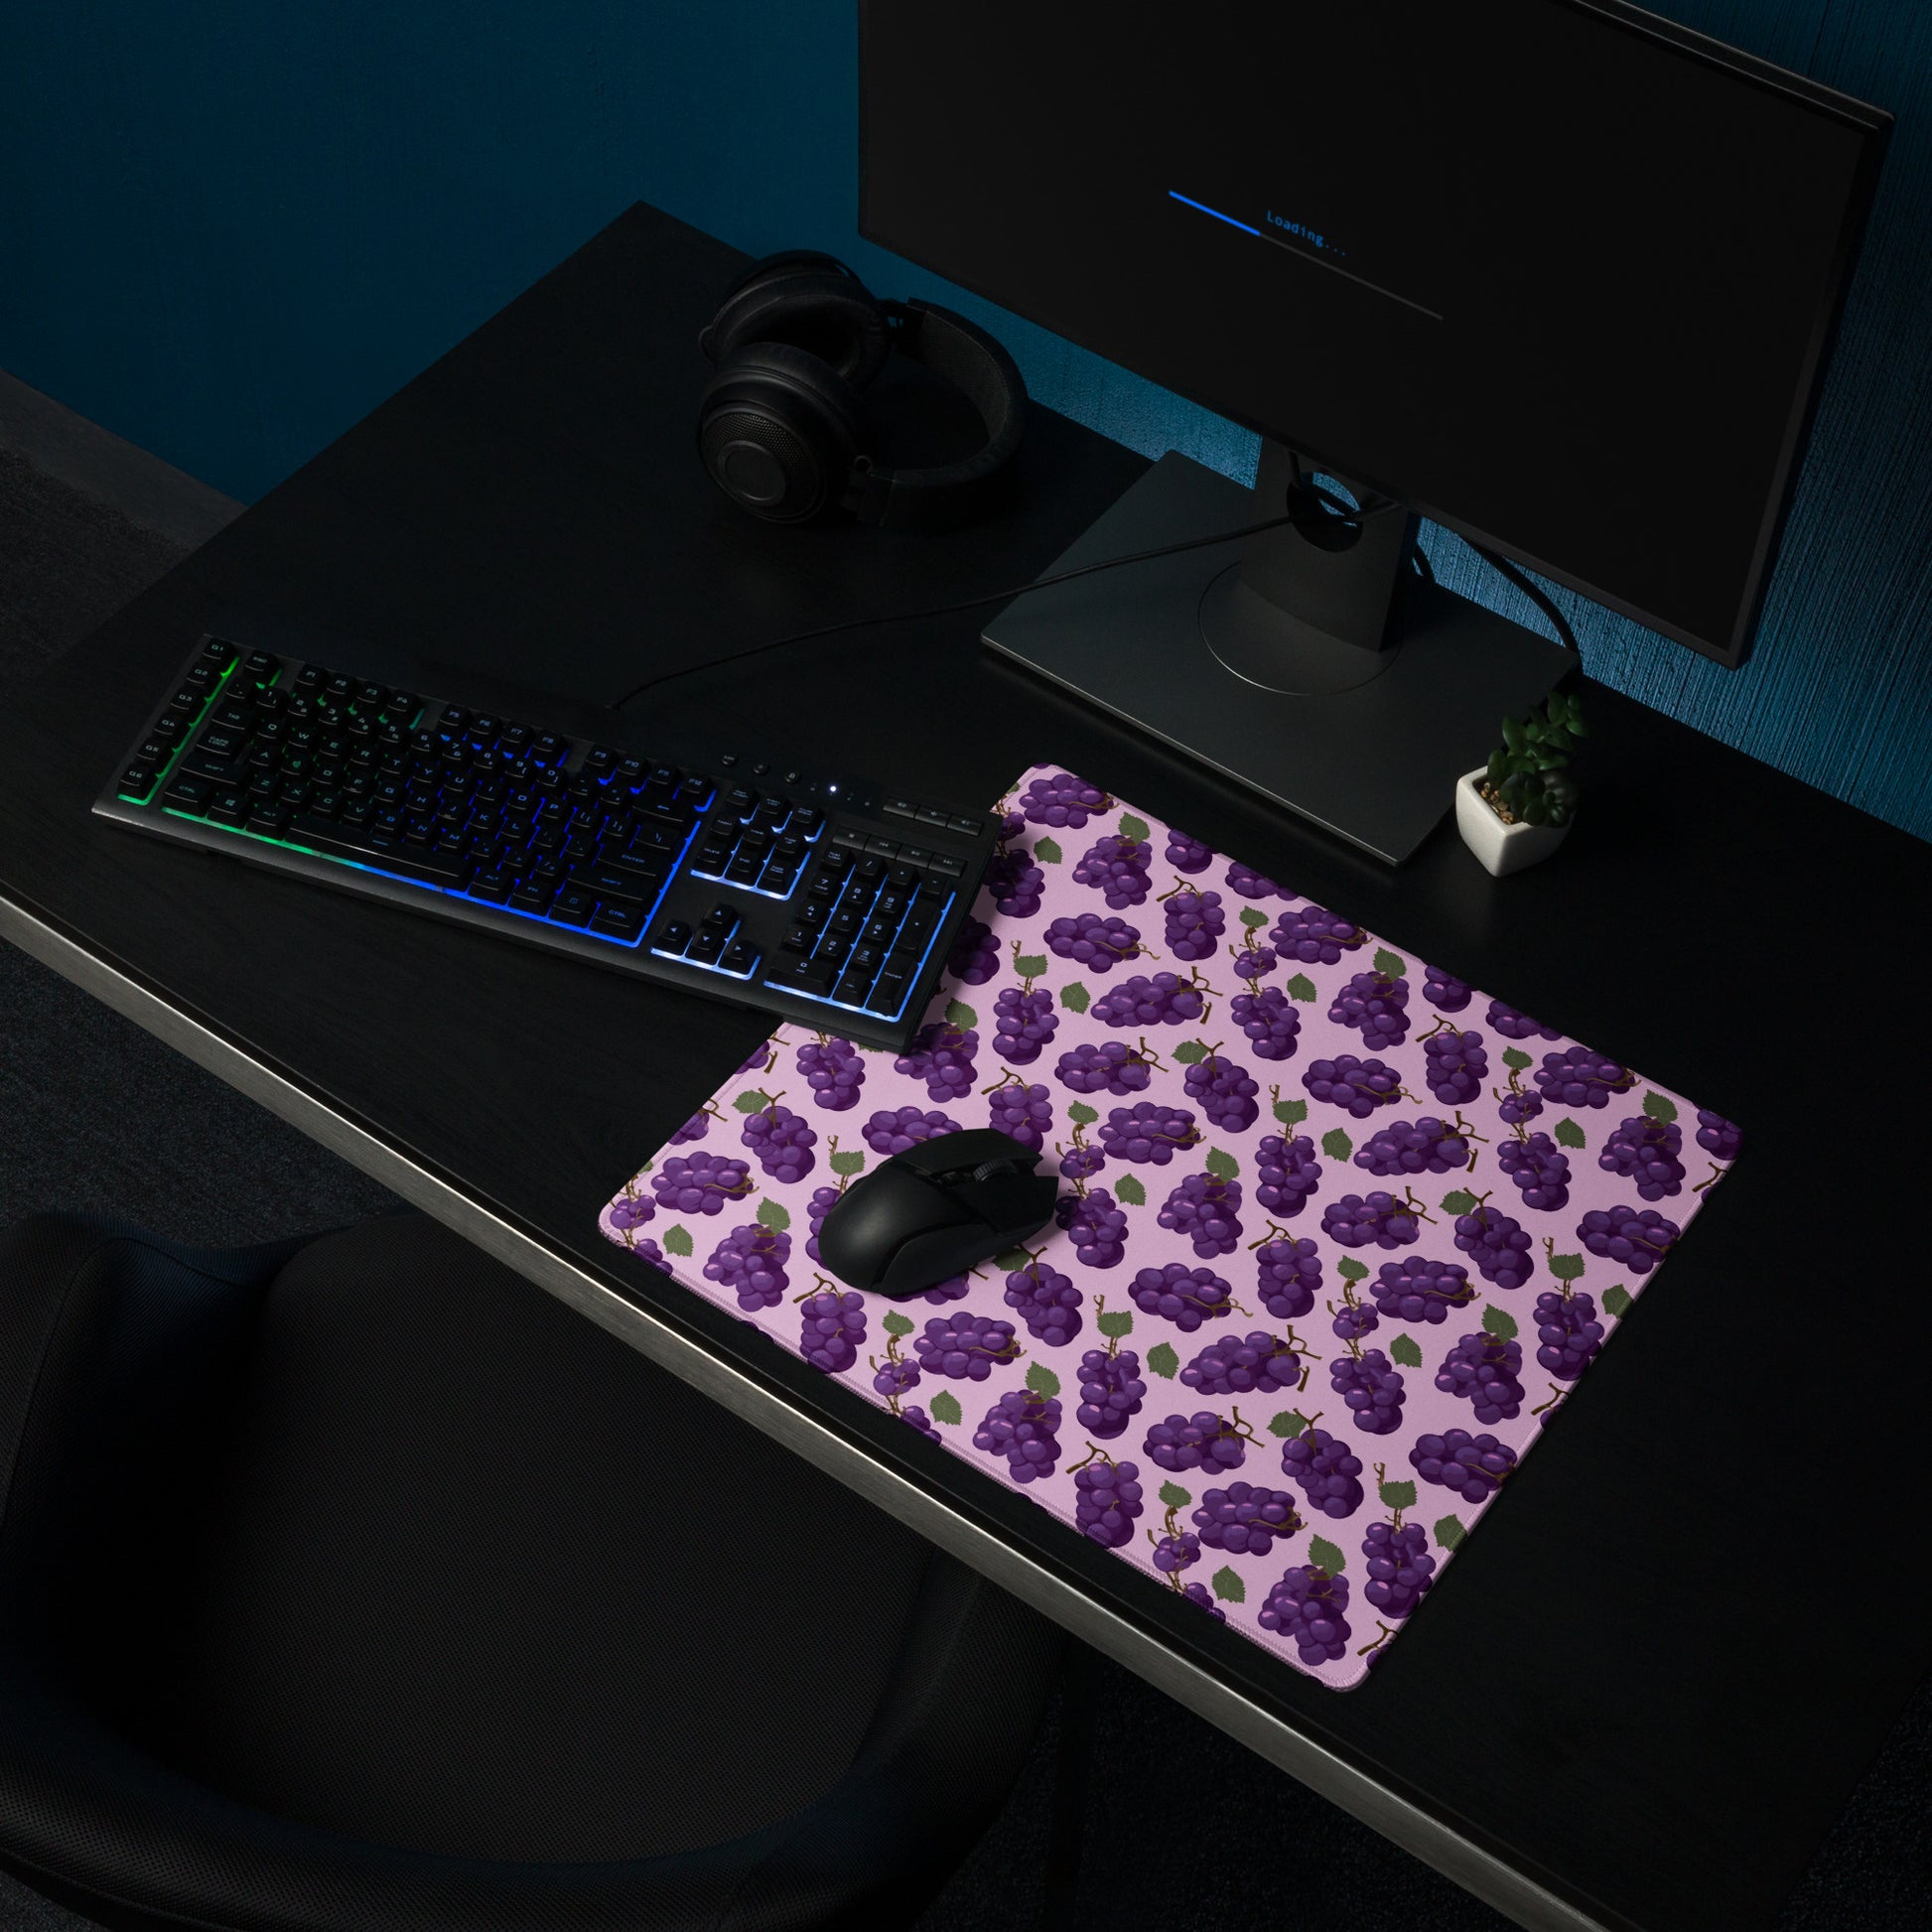 A 18" x 16" desk pad with bushels of grapes all over it shown on a desk setup. Purple in color.